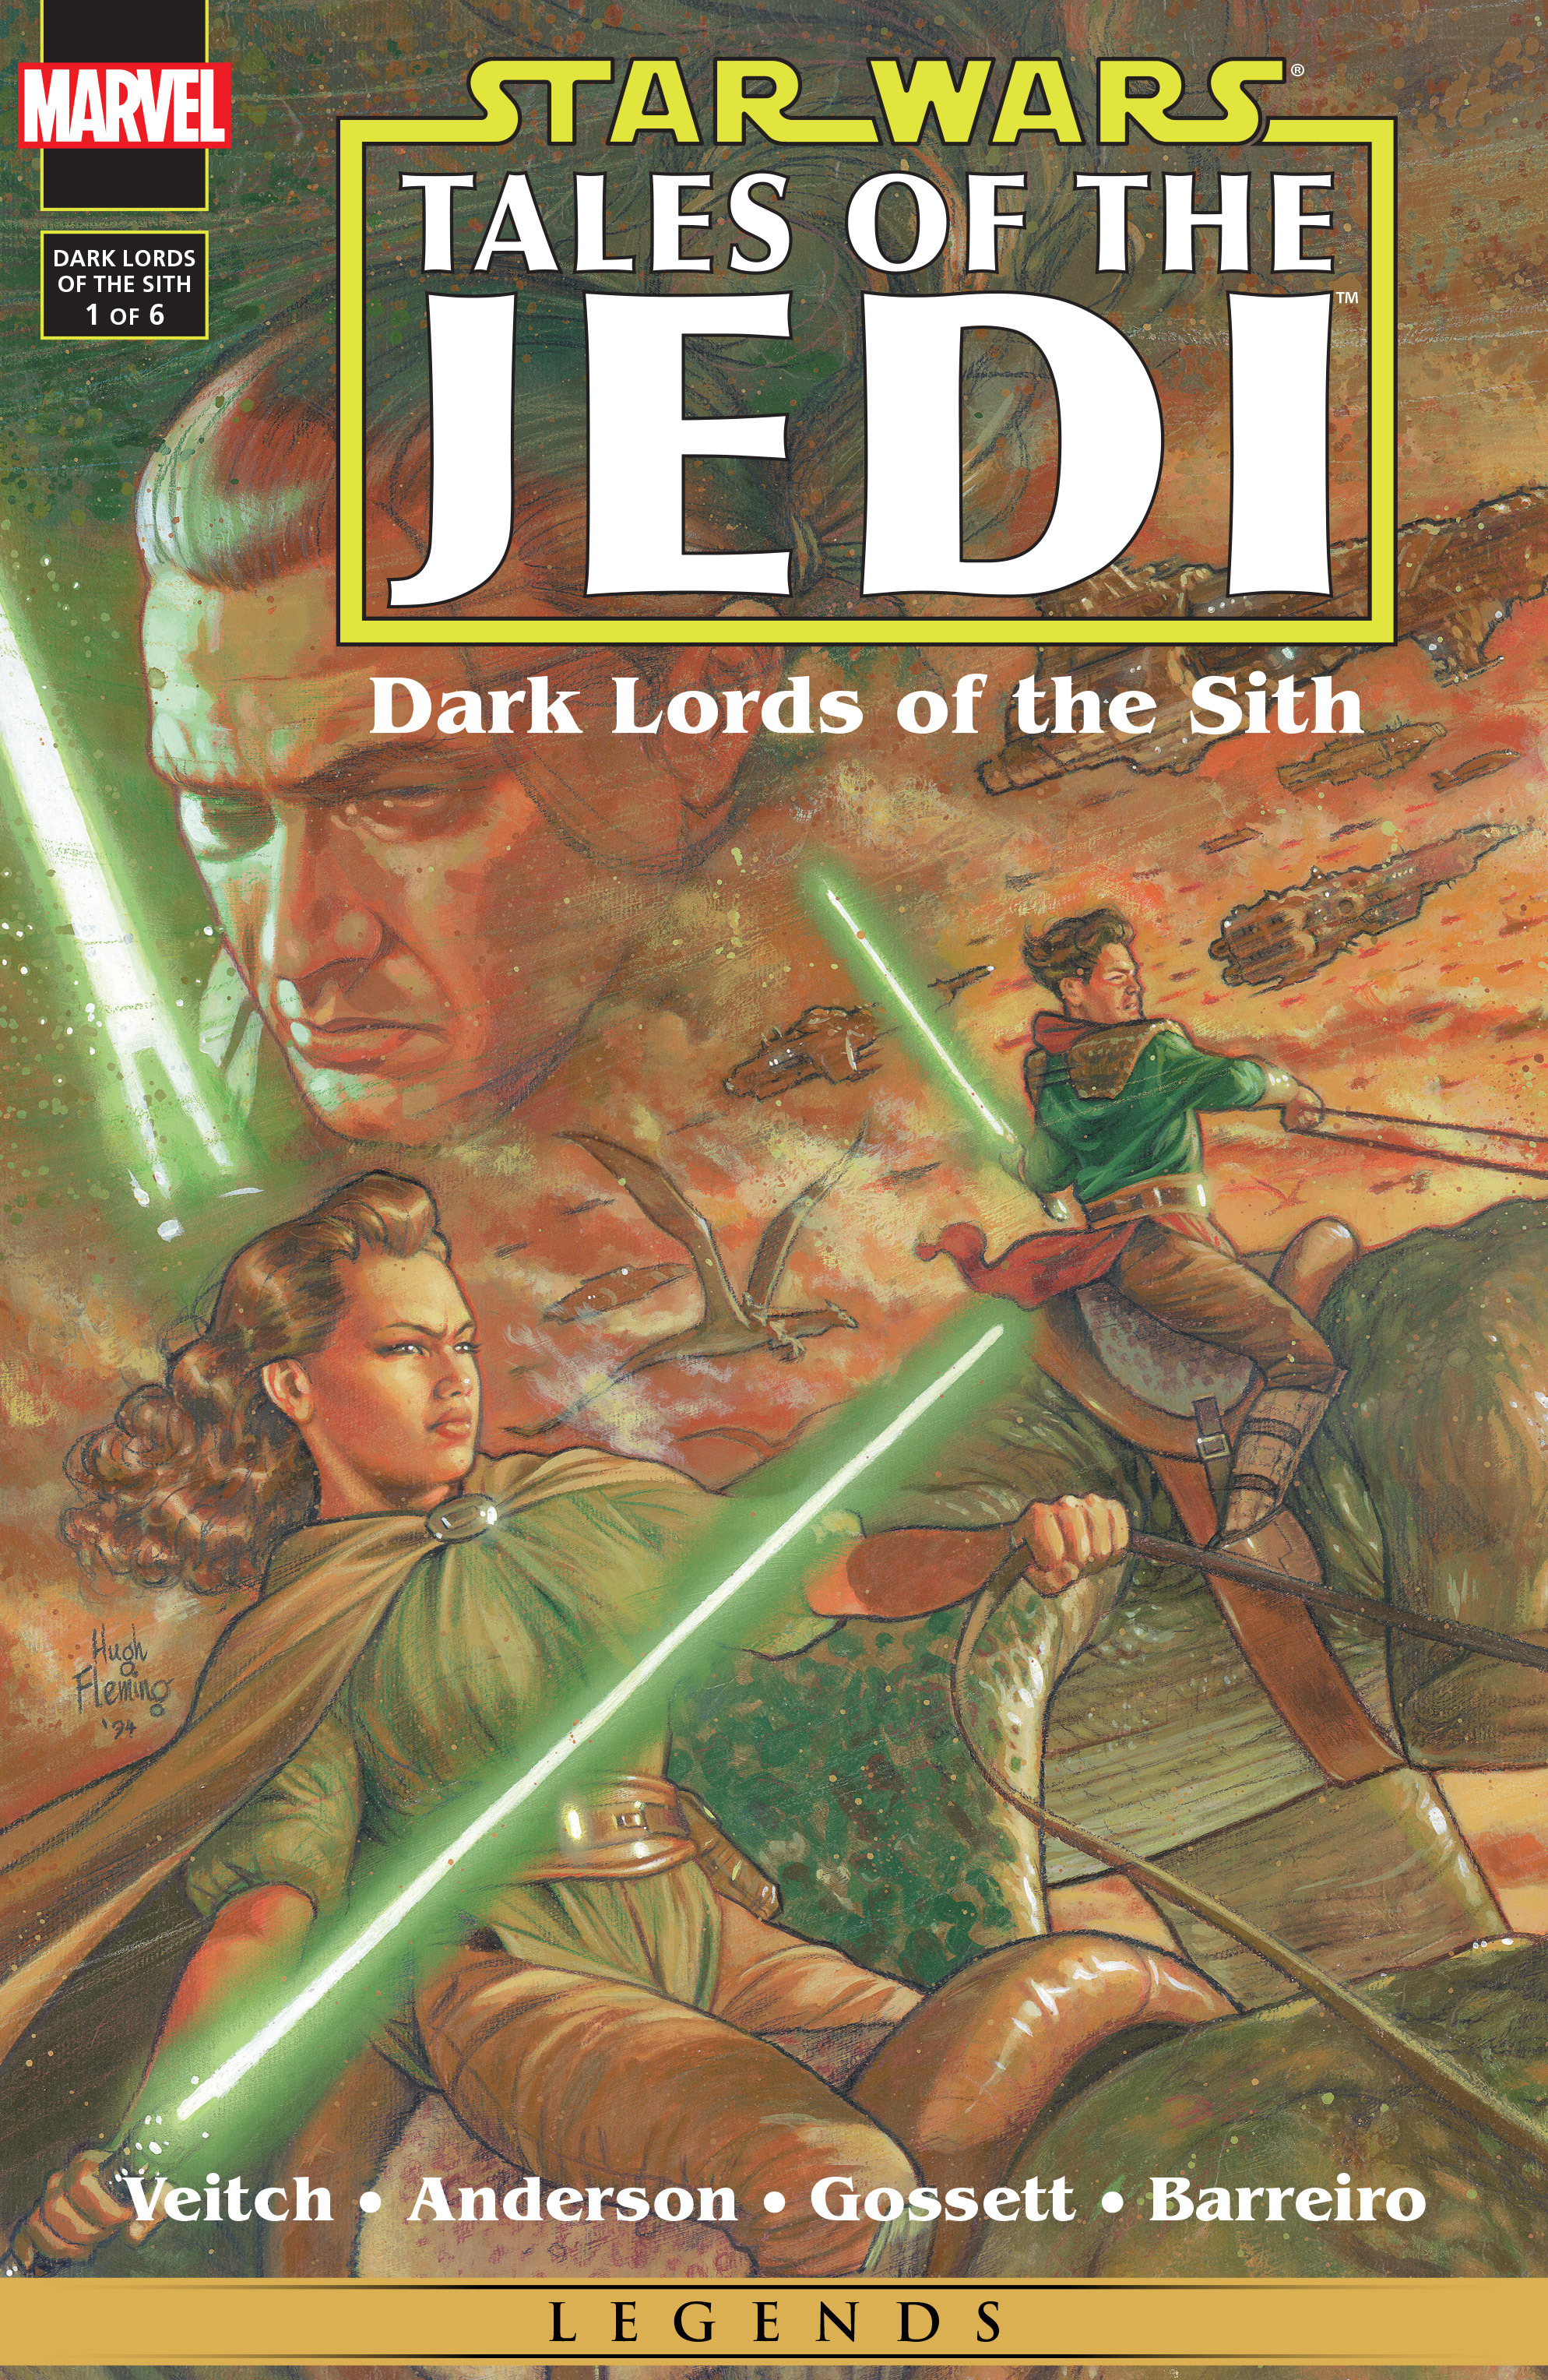 Read online Star Wars: Tales of the Jedi - Dark Lords of the Sith comic -  Issue #1 - 1